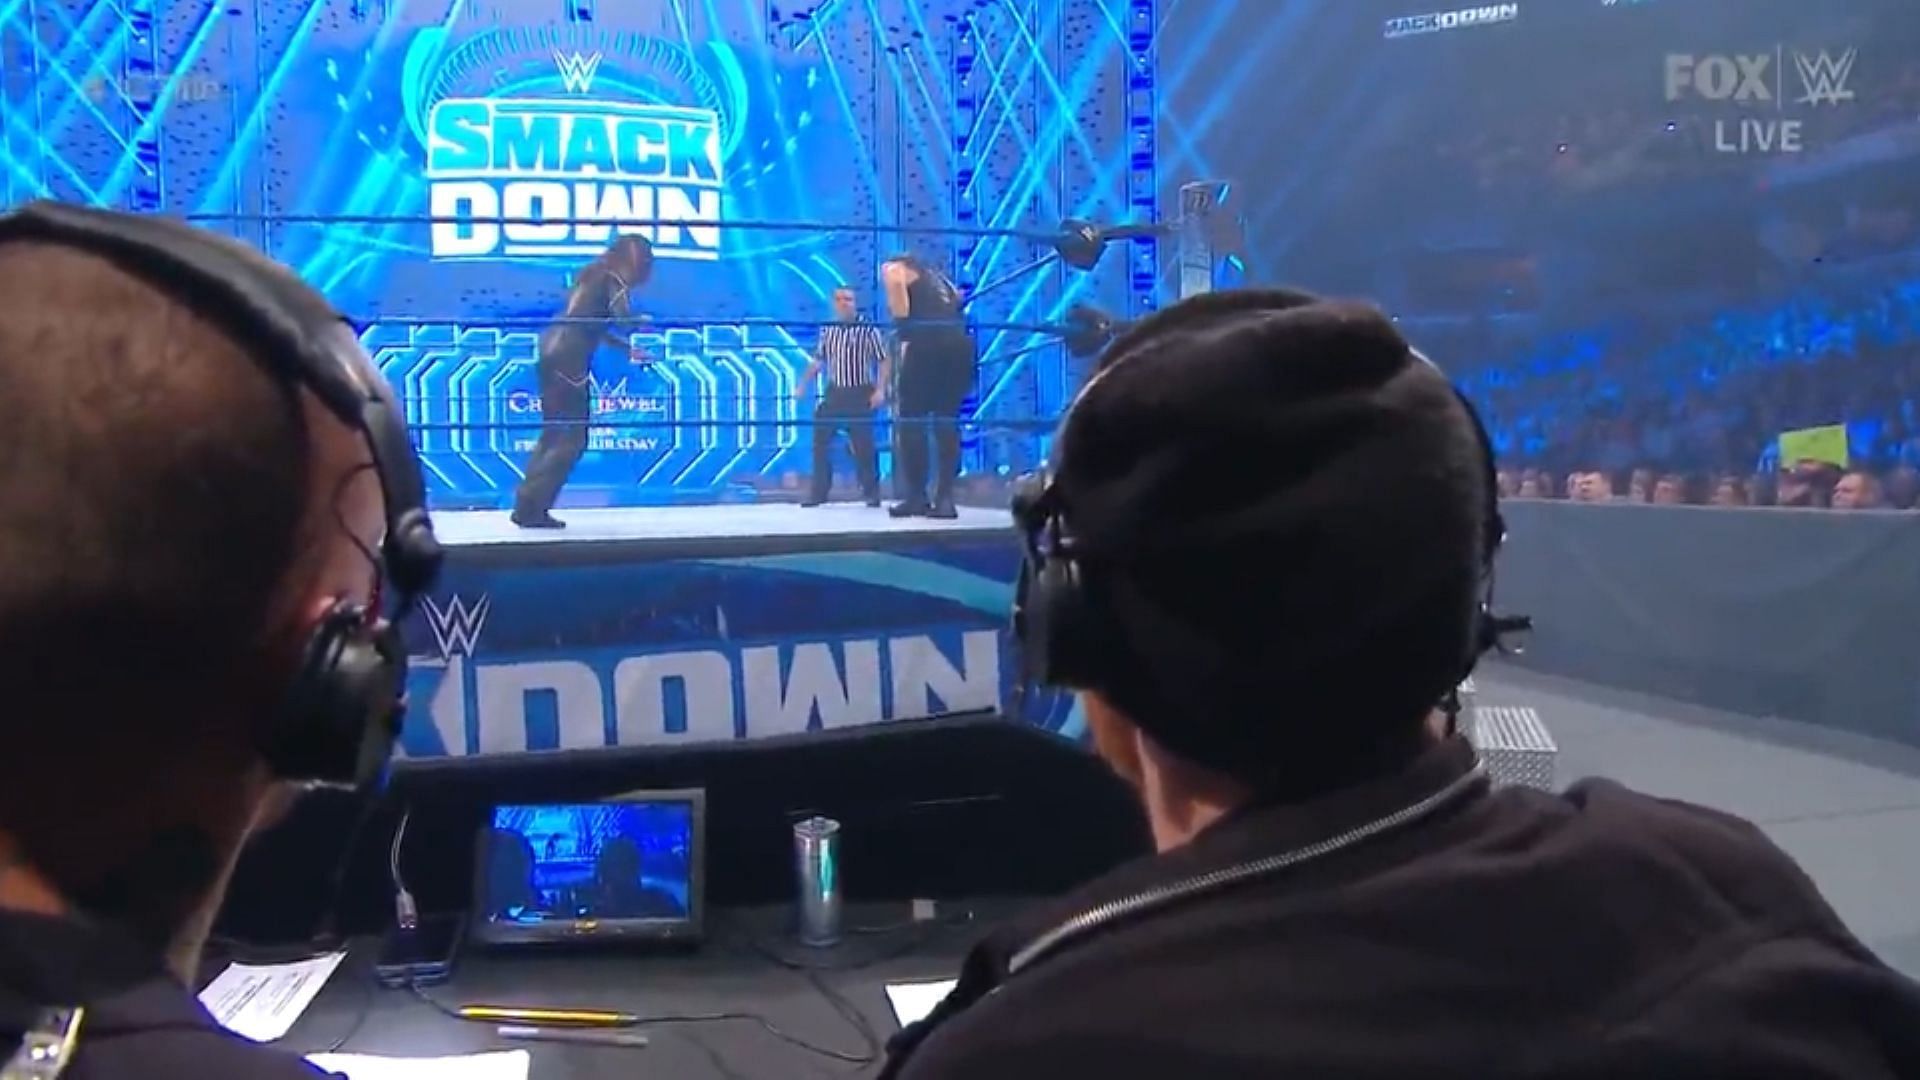 A view from behind the WWE SmackDown commentary table